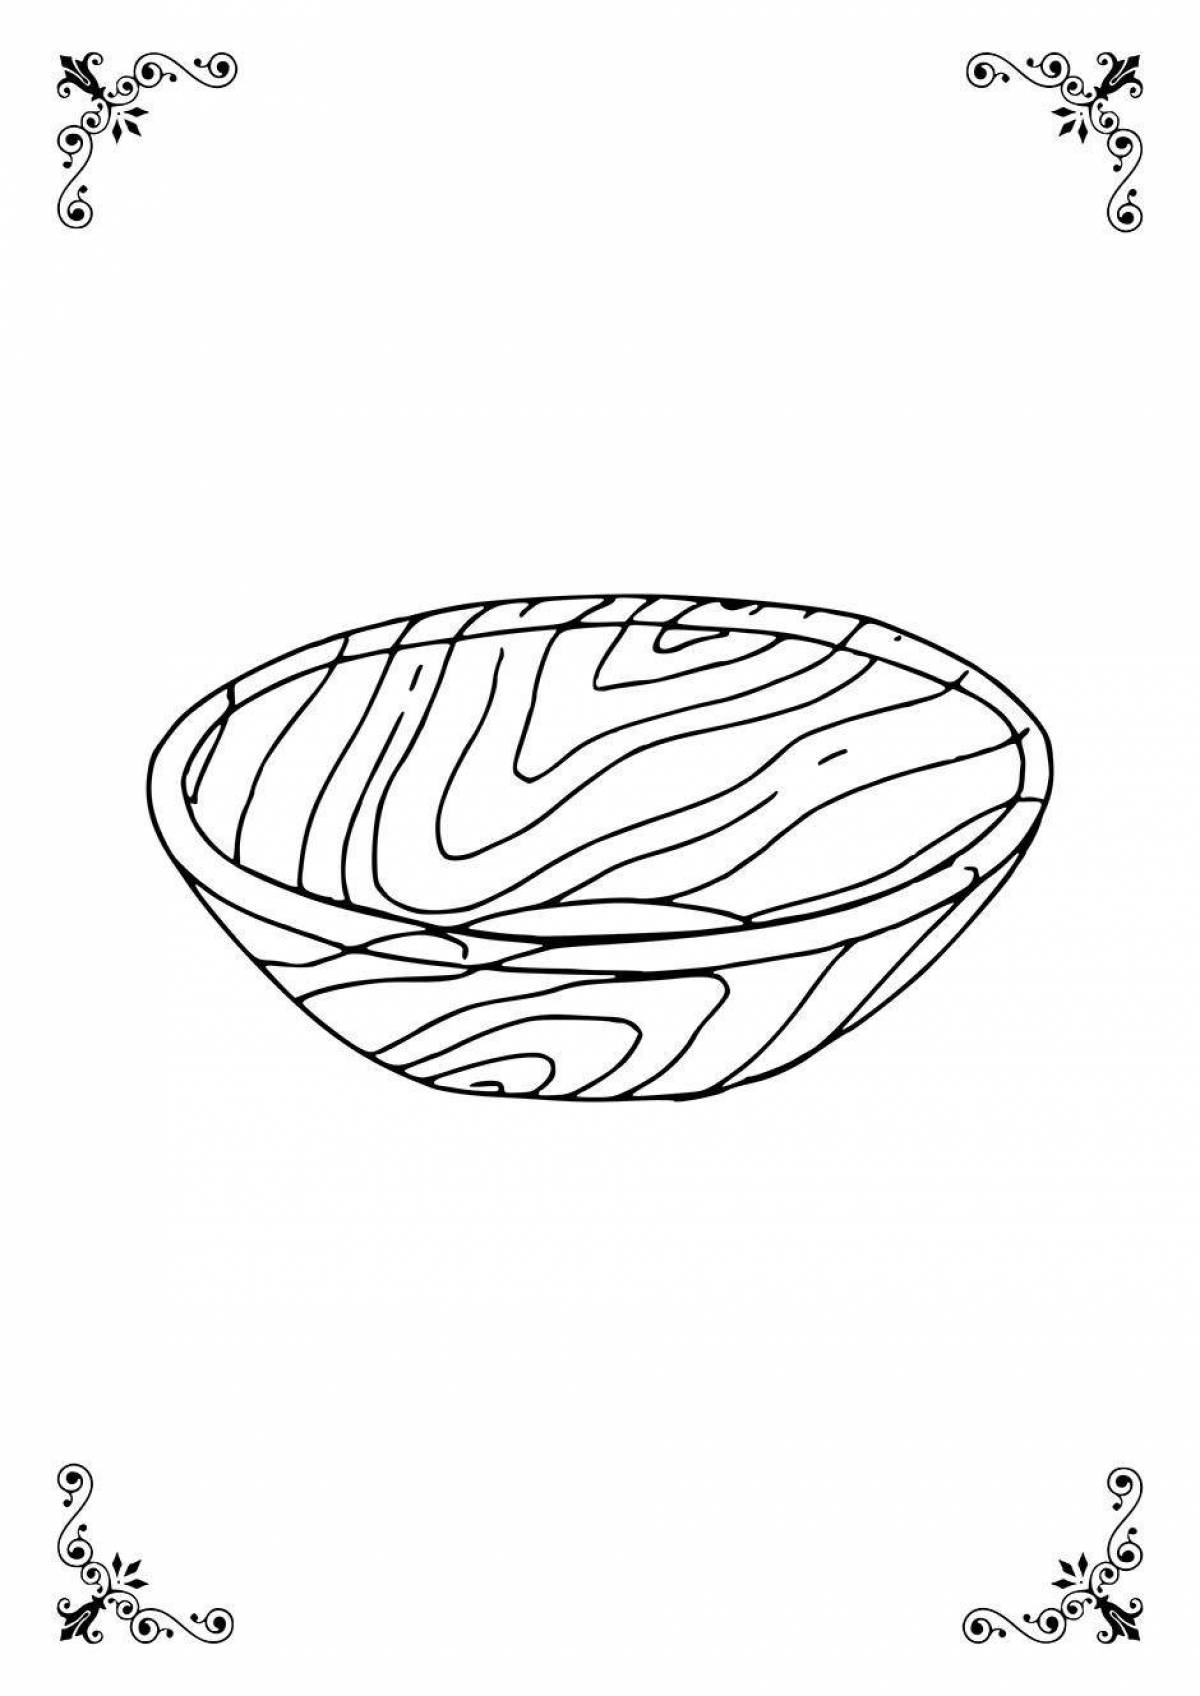 Coloring page magnificent bowl with Kazakh ornament